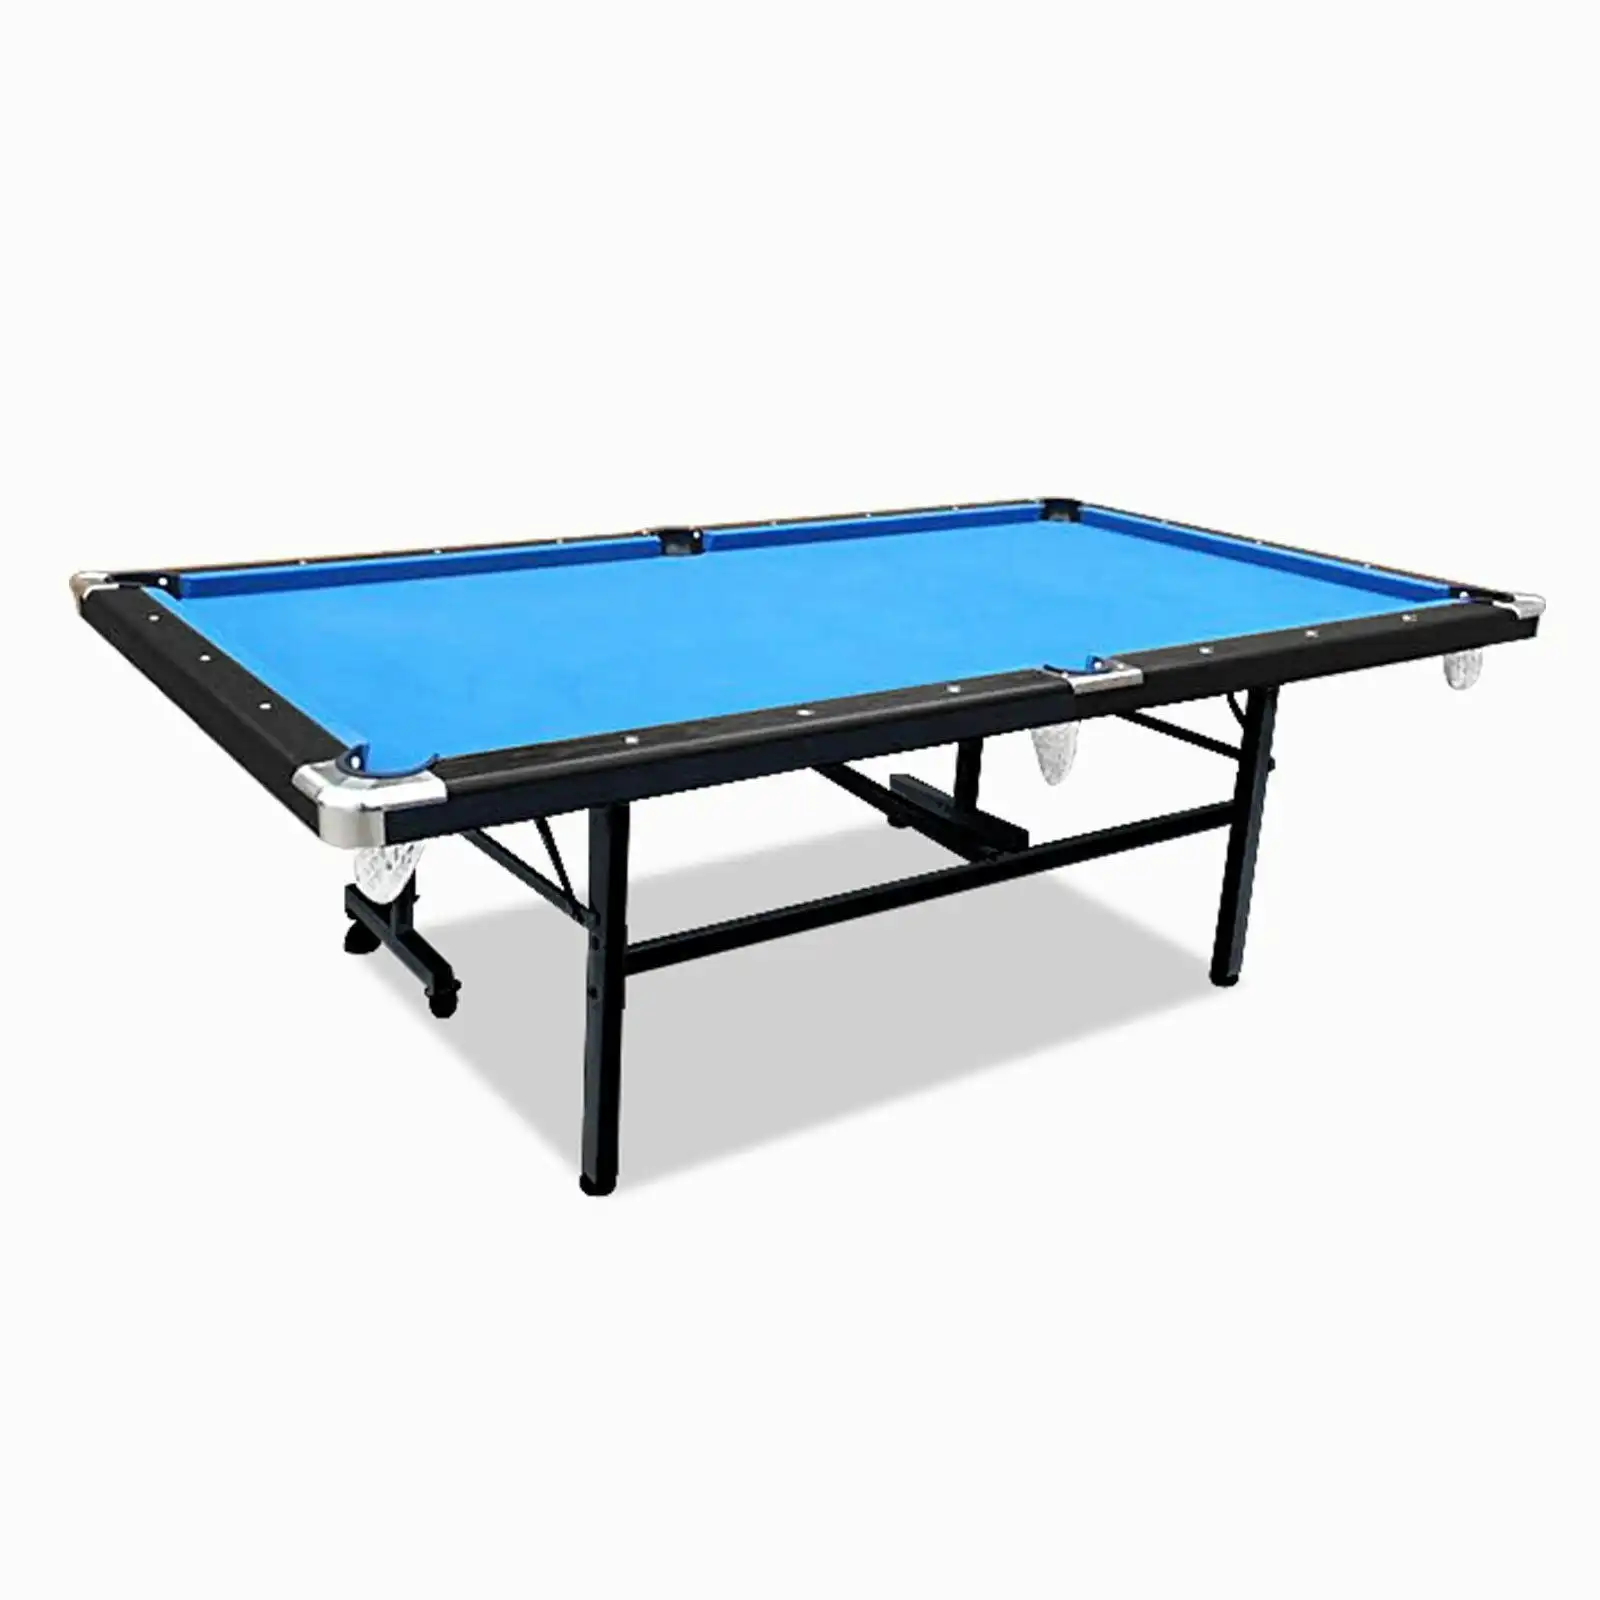 MACE 7FT Foldable Pool Table Billiard Table Free Accessory for Small Room